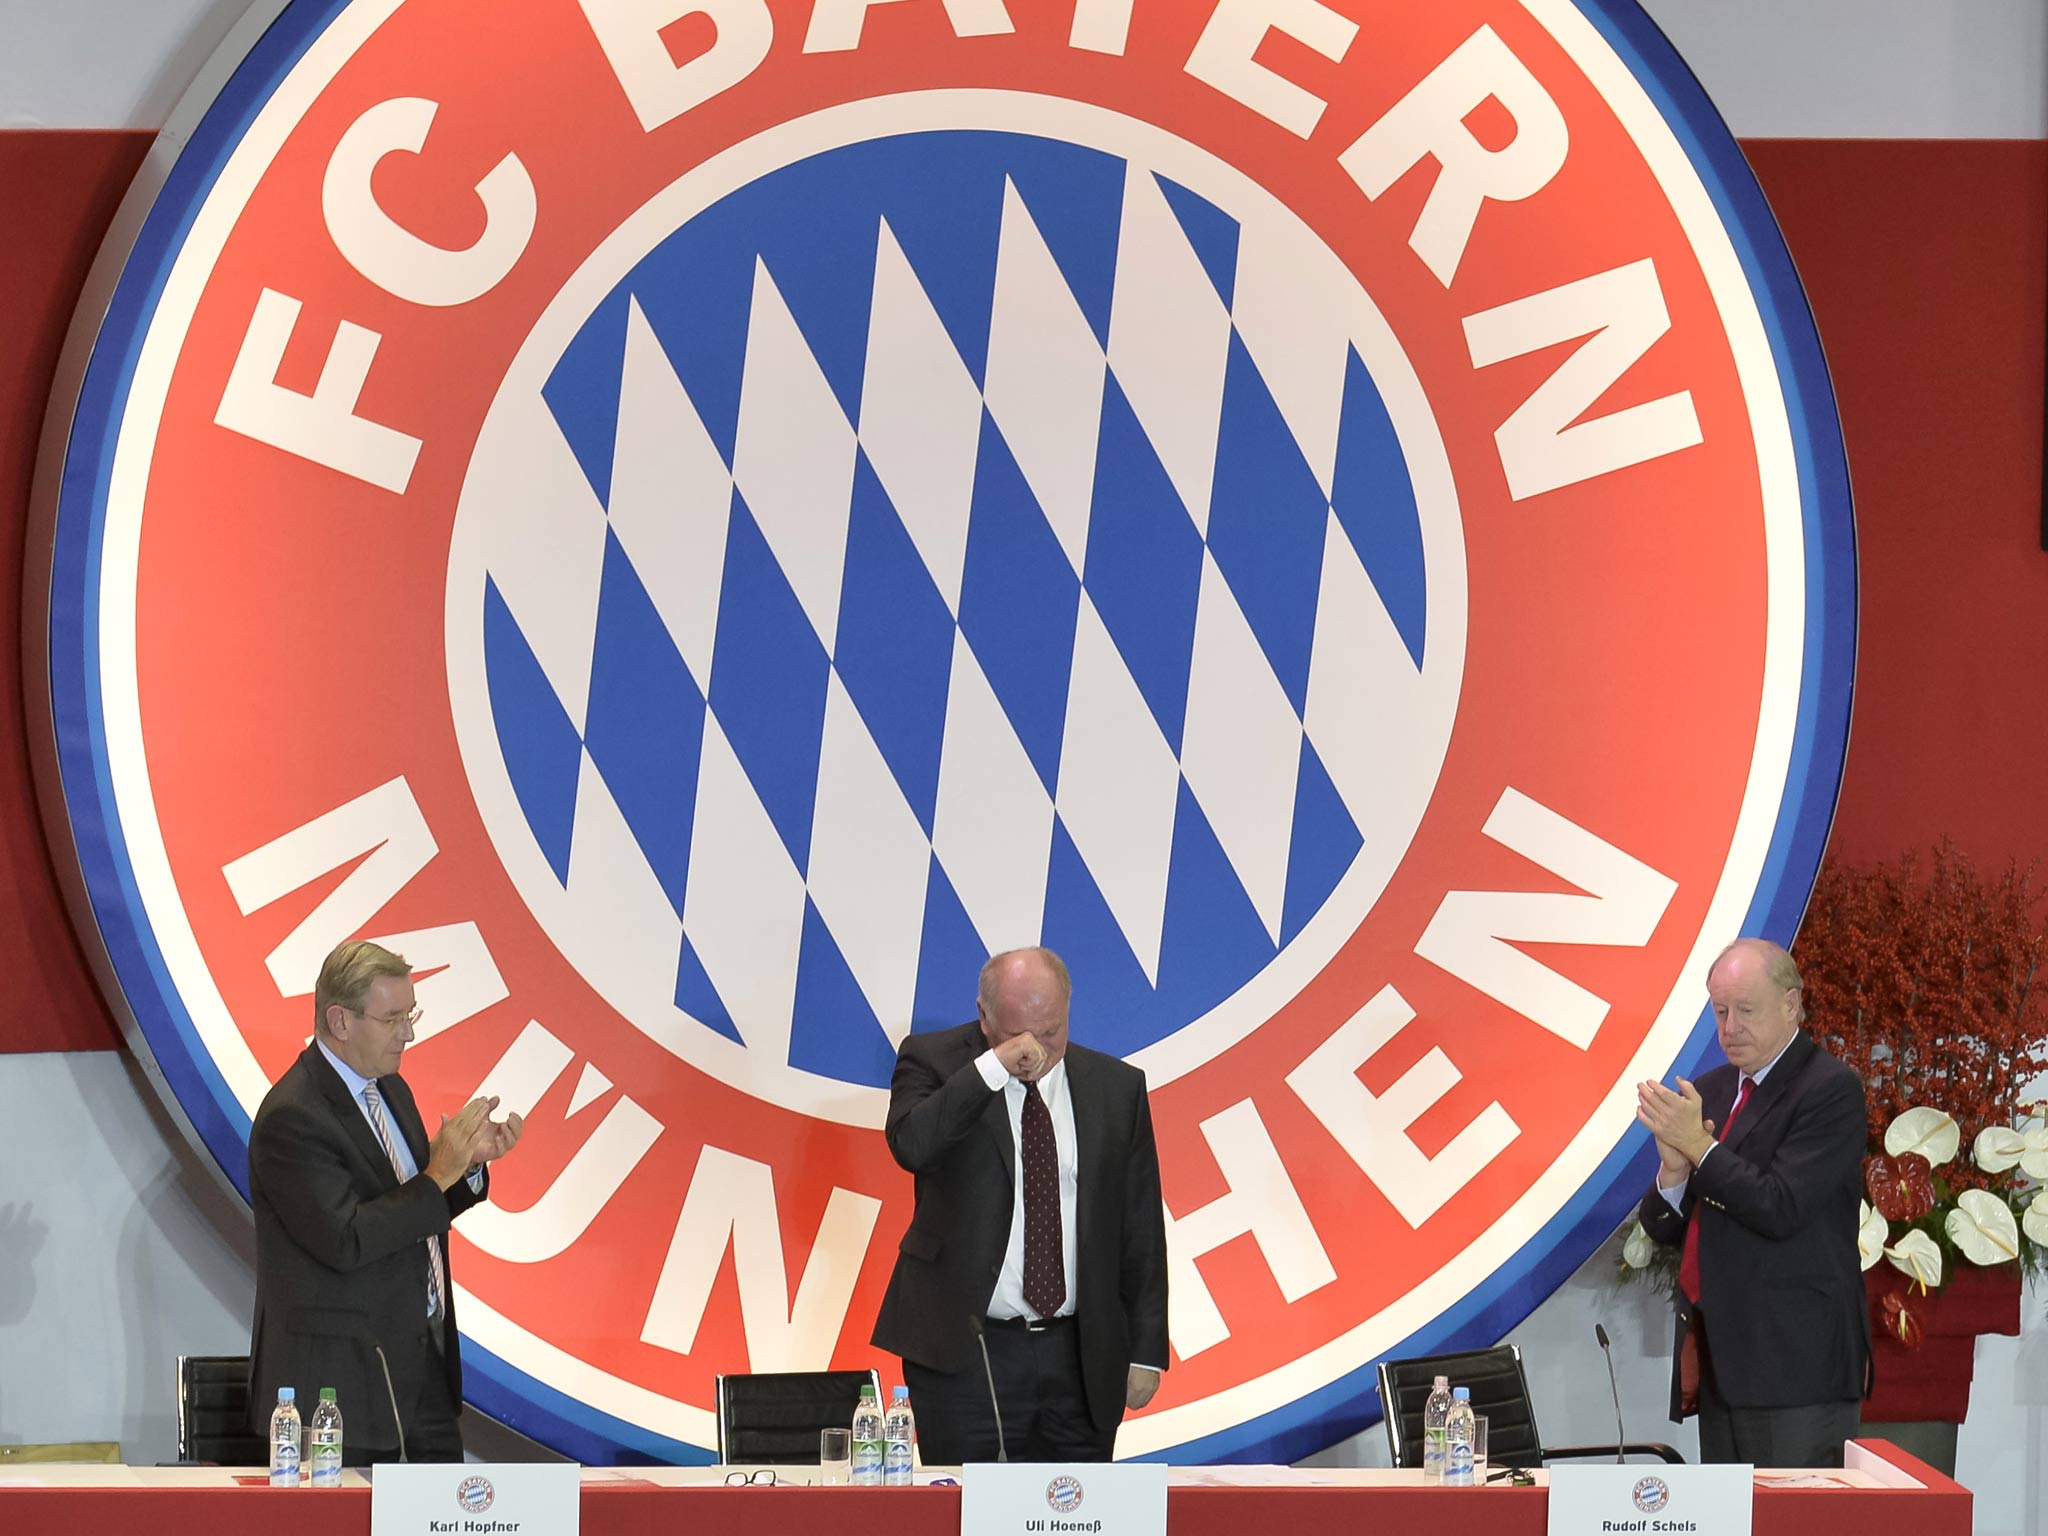 Bayern Munich president Uli Hoeness is reduced to tears at the club's annual general meeting